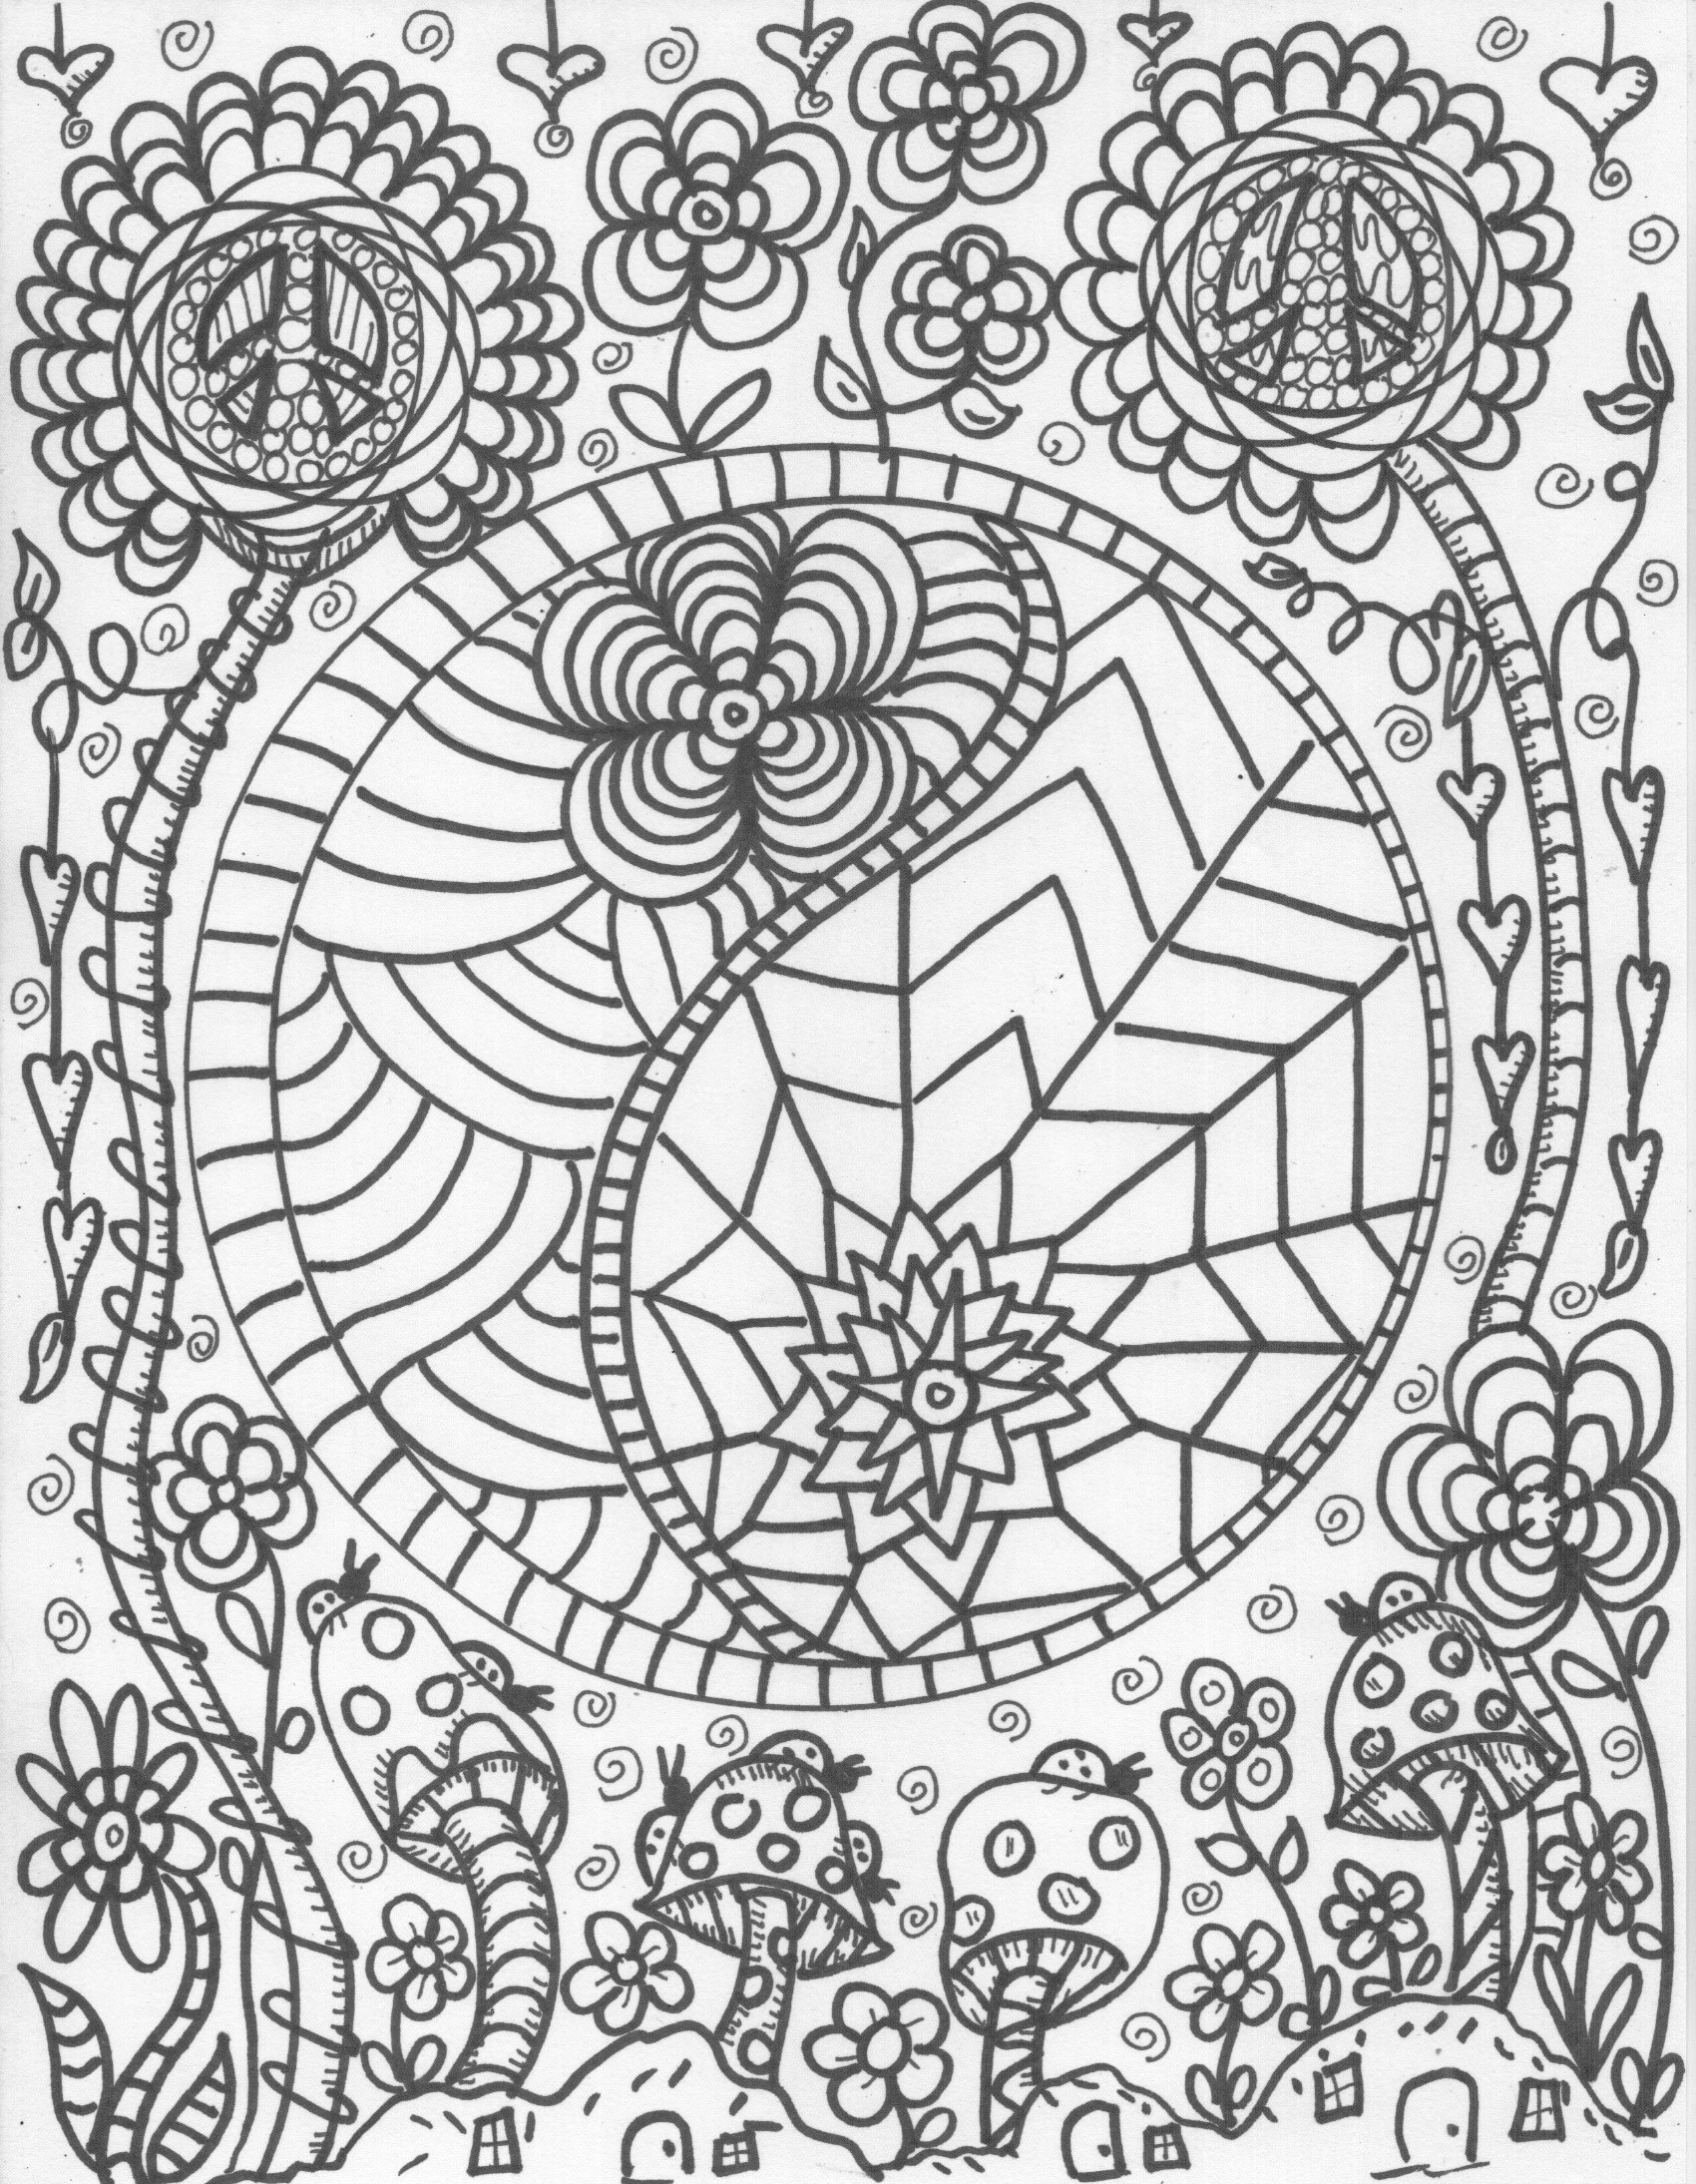 Trippy Coloring Book Pages
 25 Trippy Coloring Pages ColoringStar